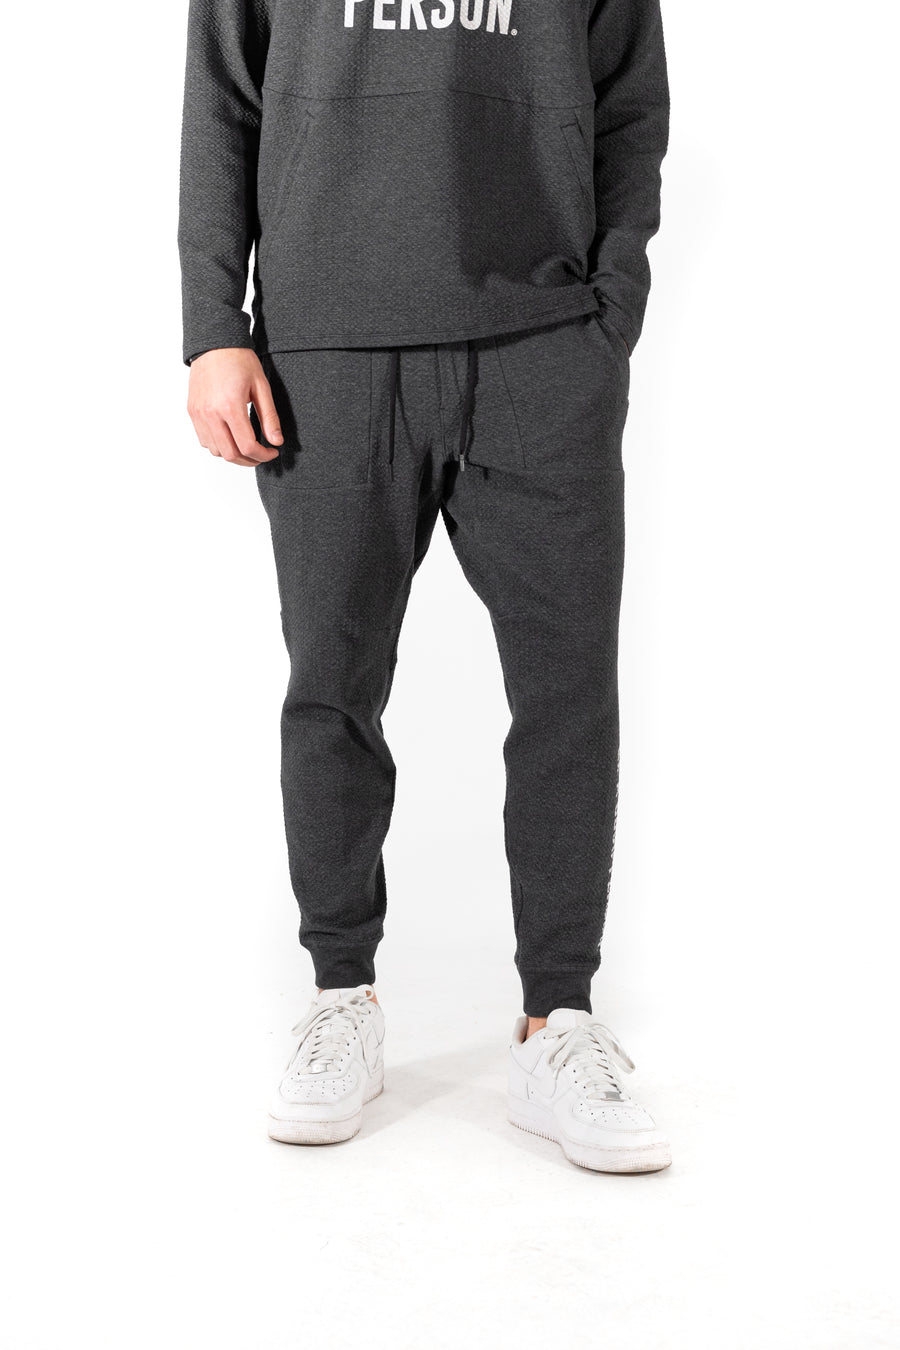 At Ease Textured Double Knit Jogger - Heathered Black/Black - lululemon // BE A GOOD PERSON